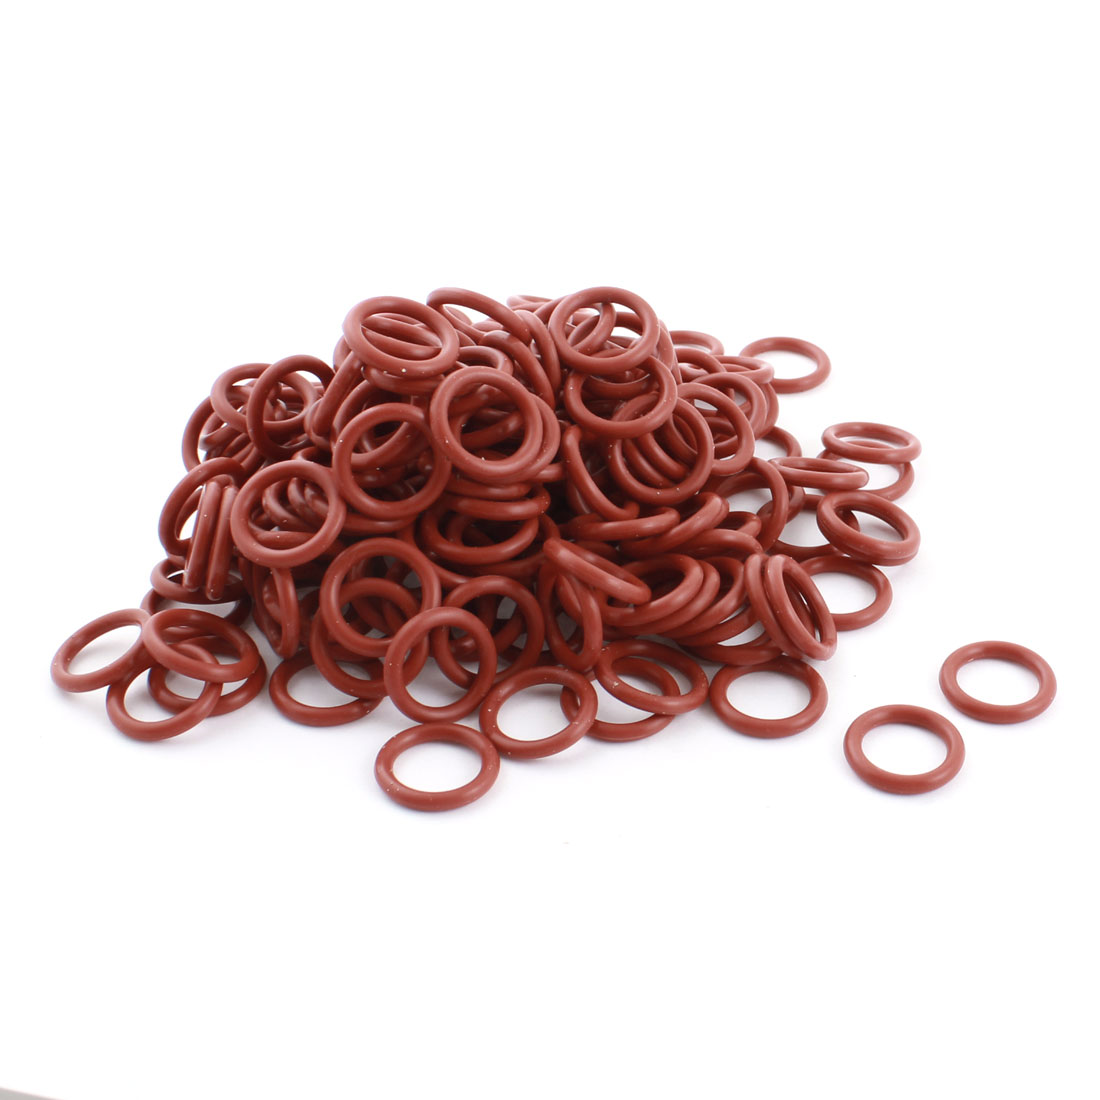 Unique Bargains 200Pcs 20mm x 14mm x 3mm Red Rubber RC Model Motor Oil Seal O Ring Gasket Spacer